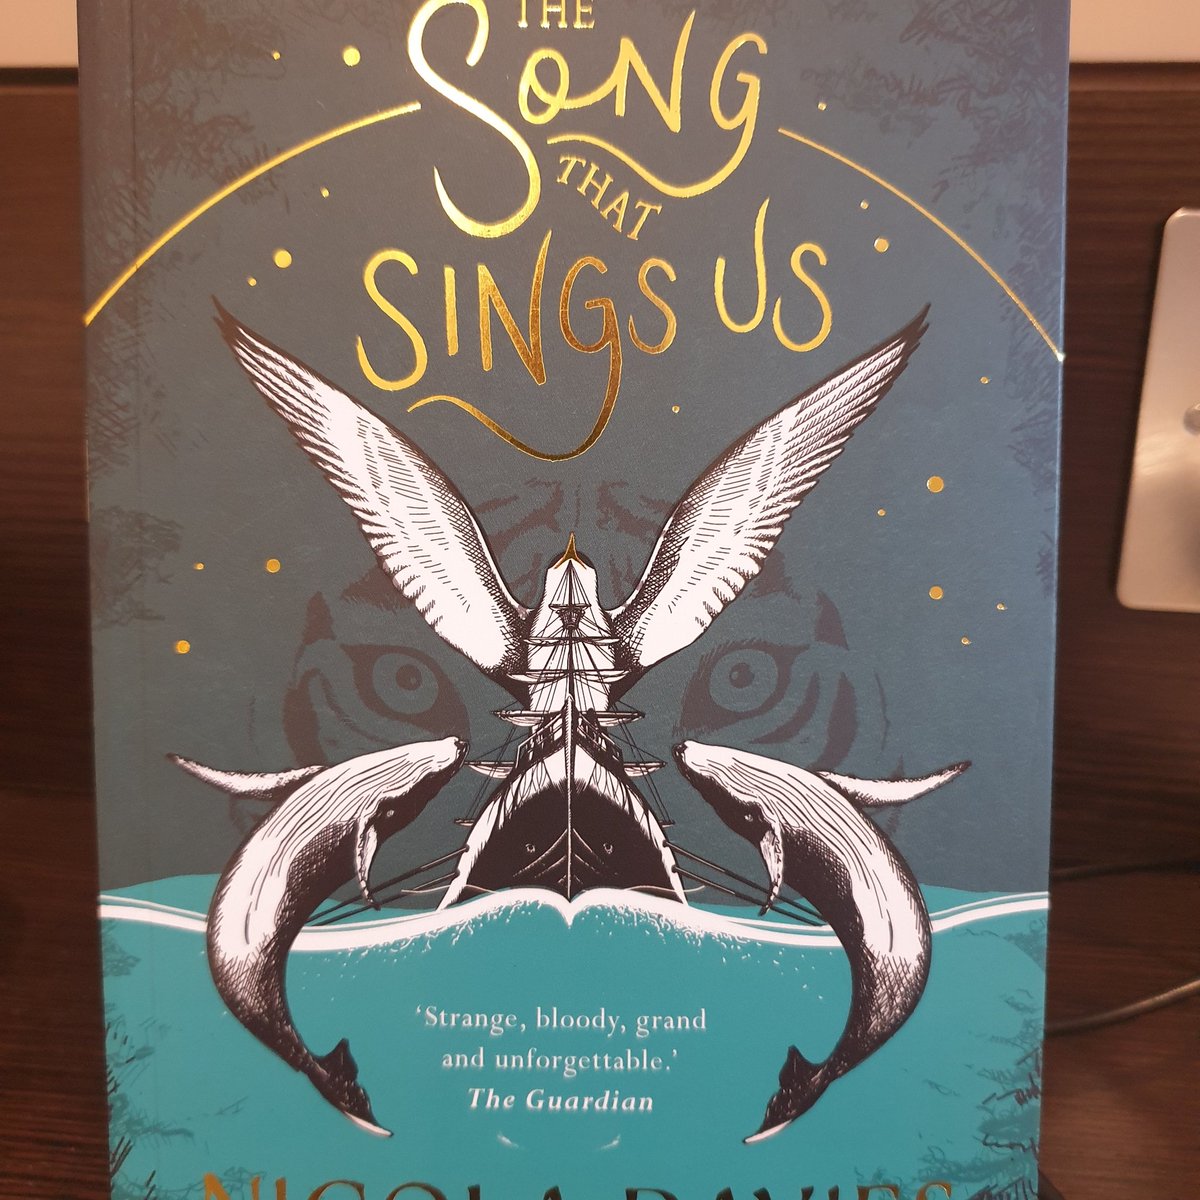 As part of the Song That Sings Us being Waterstones Book Of The Month in Wales I'm off on little signing tour. Aberystwyth, Carmarthen,Swansea today, Cardiff, Newport and Abergavenny waterstones tomorrow @swanseastones @FireflyPress @bouncemarketing